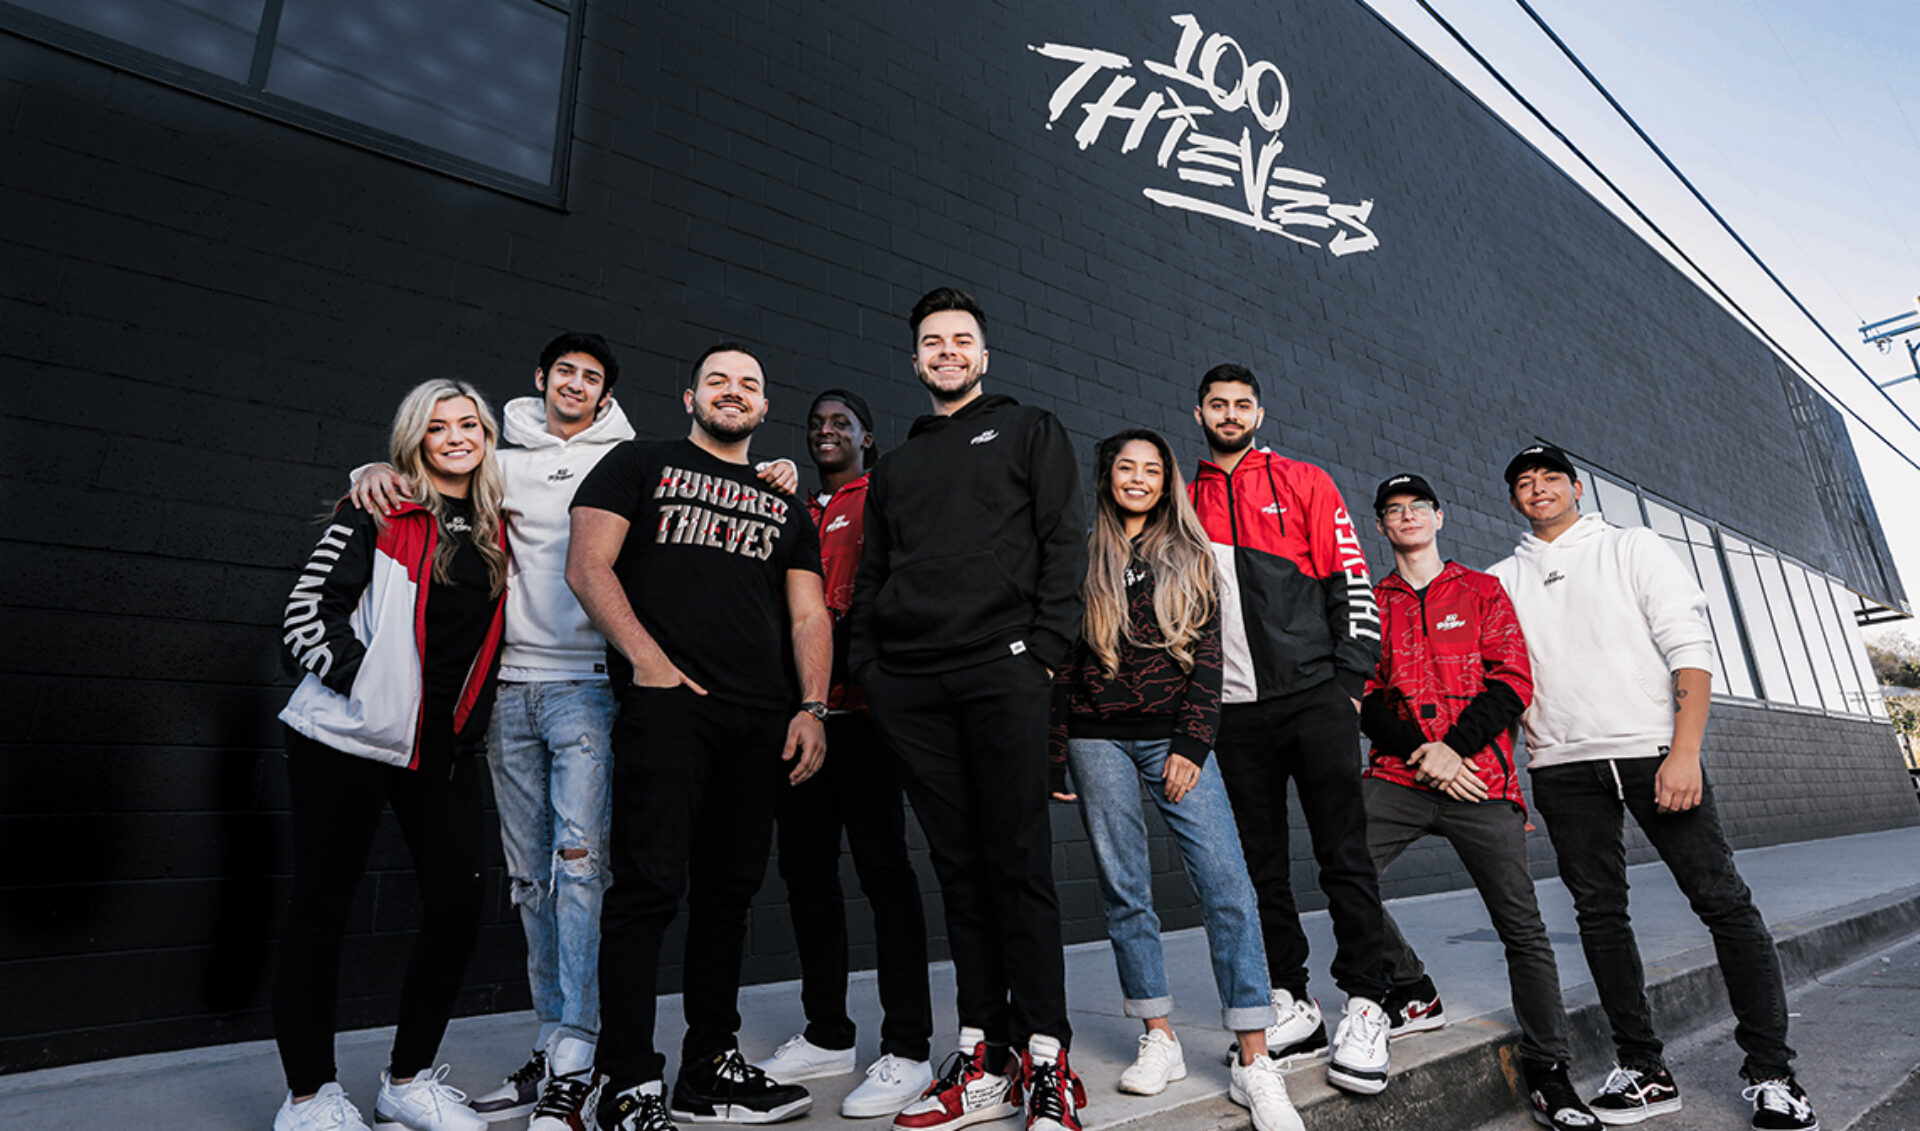 100 thieves Archives - Page 3 of 4 - Tubefilter